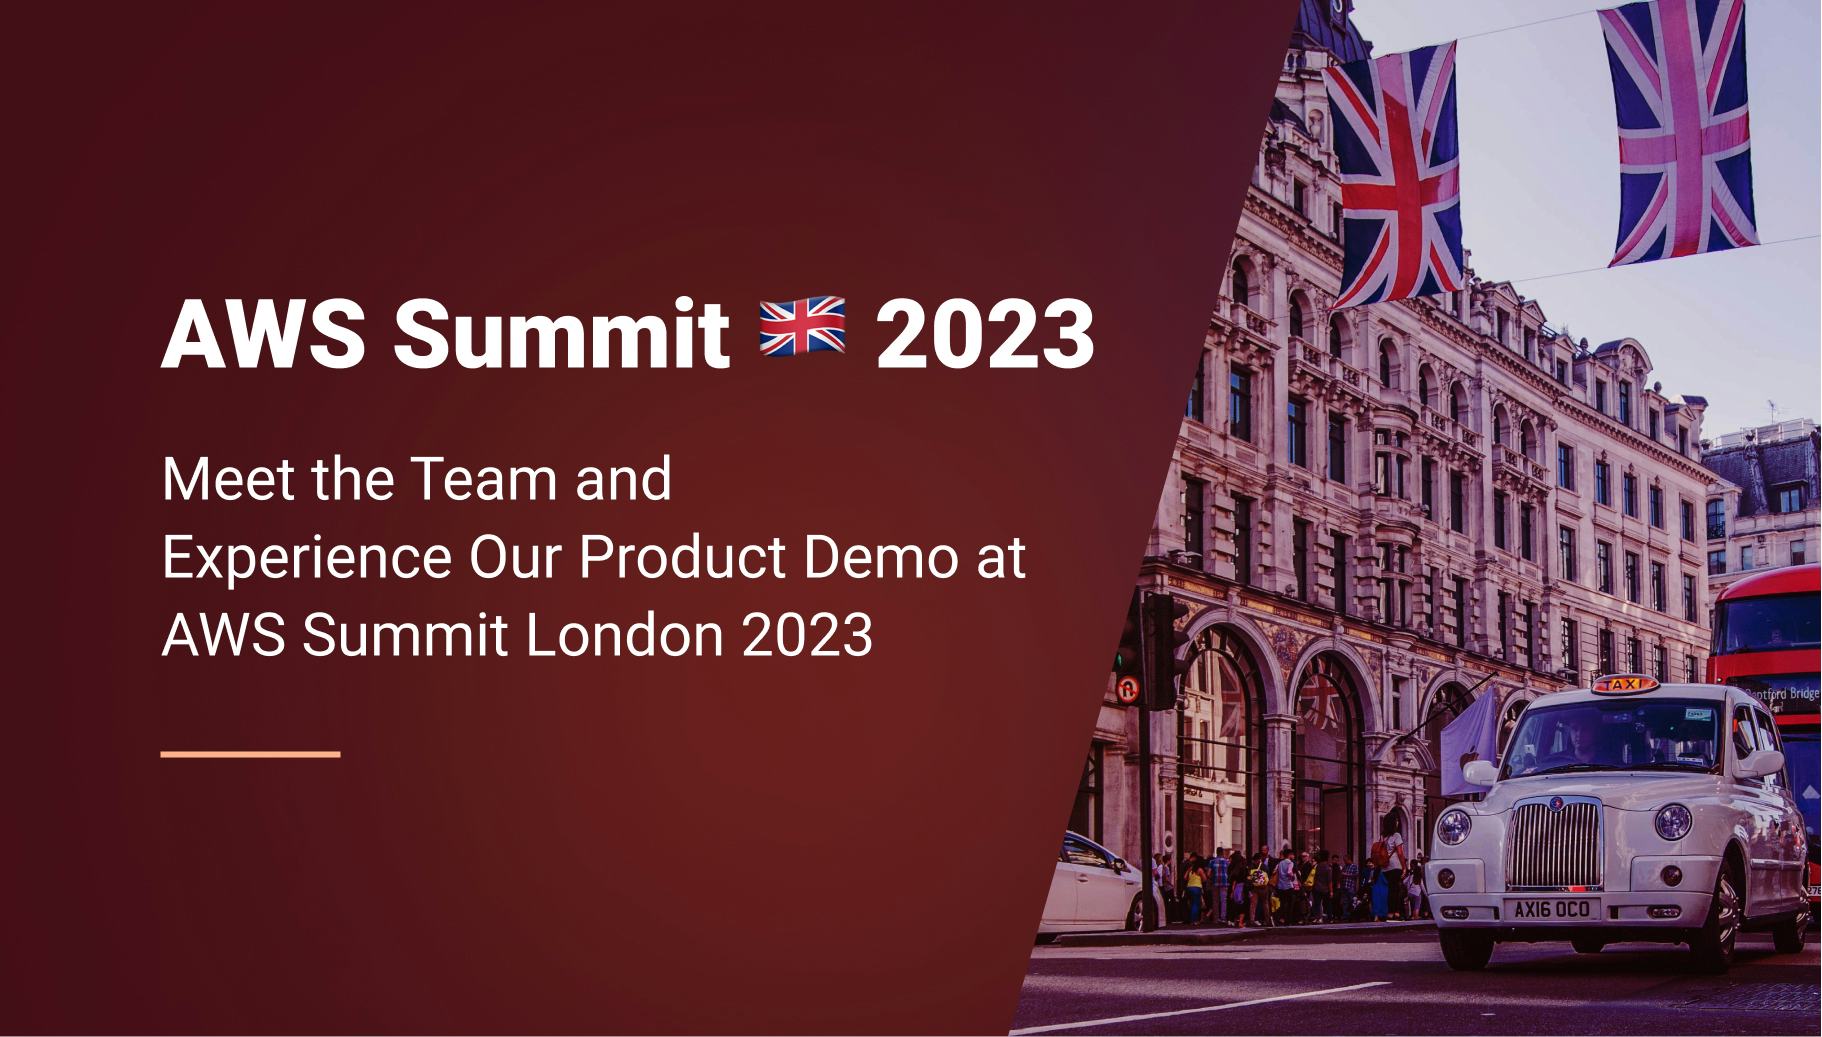 Join Qovery at AWS Summit London 2023 - Meet the Team and Experience Our Product Demo!